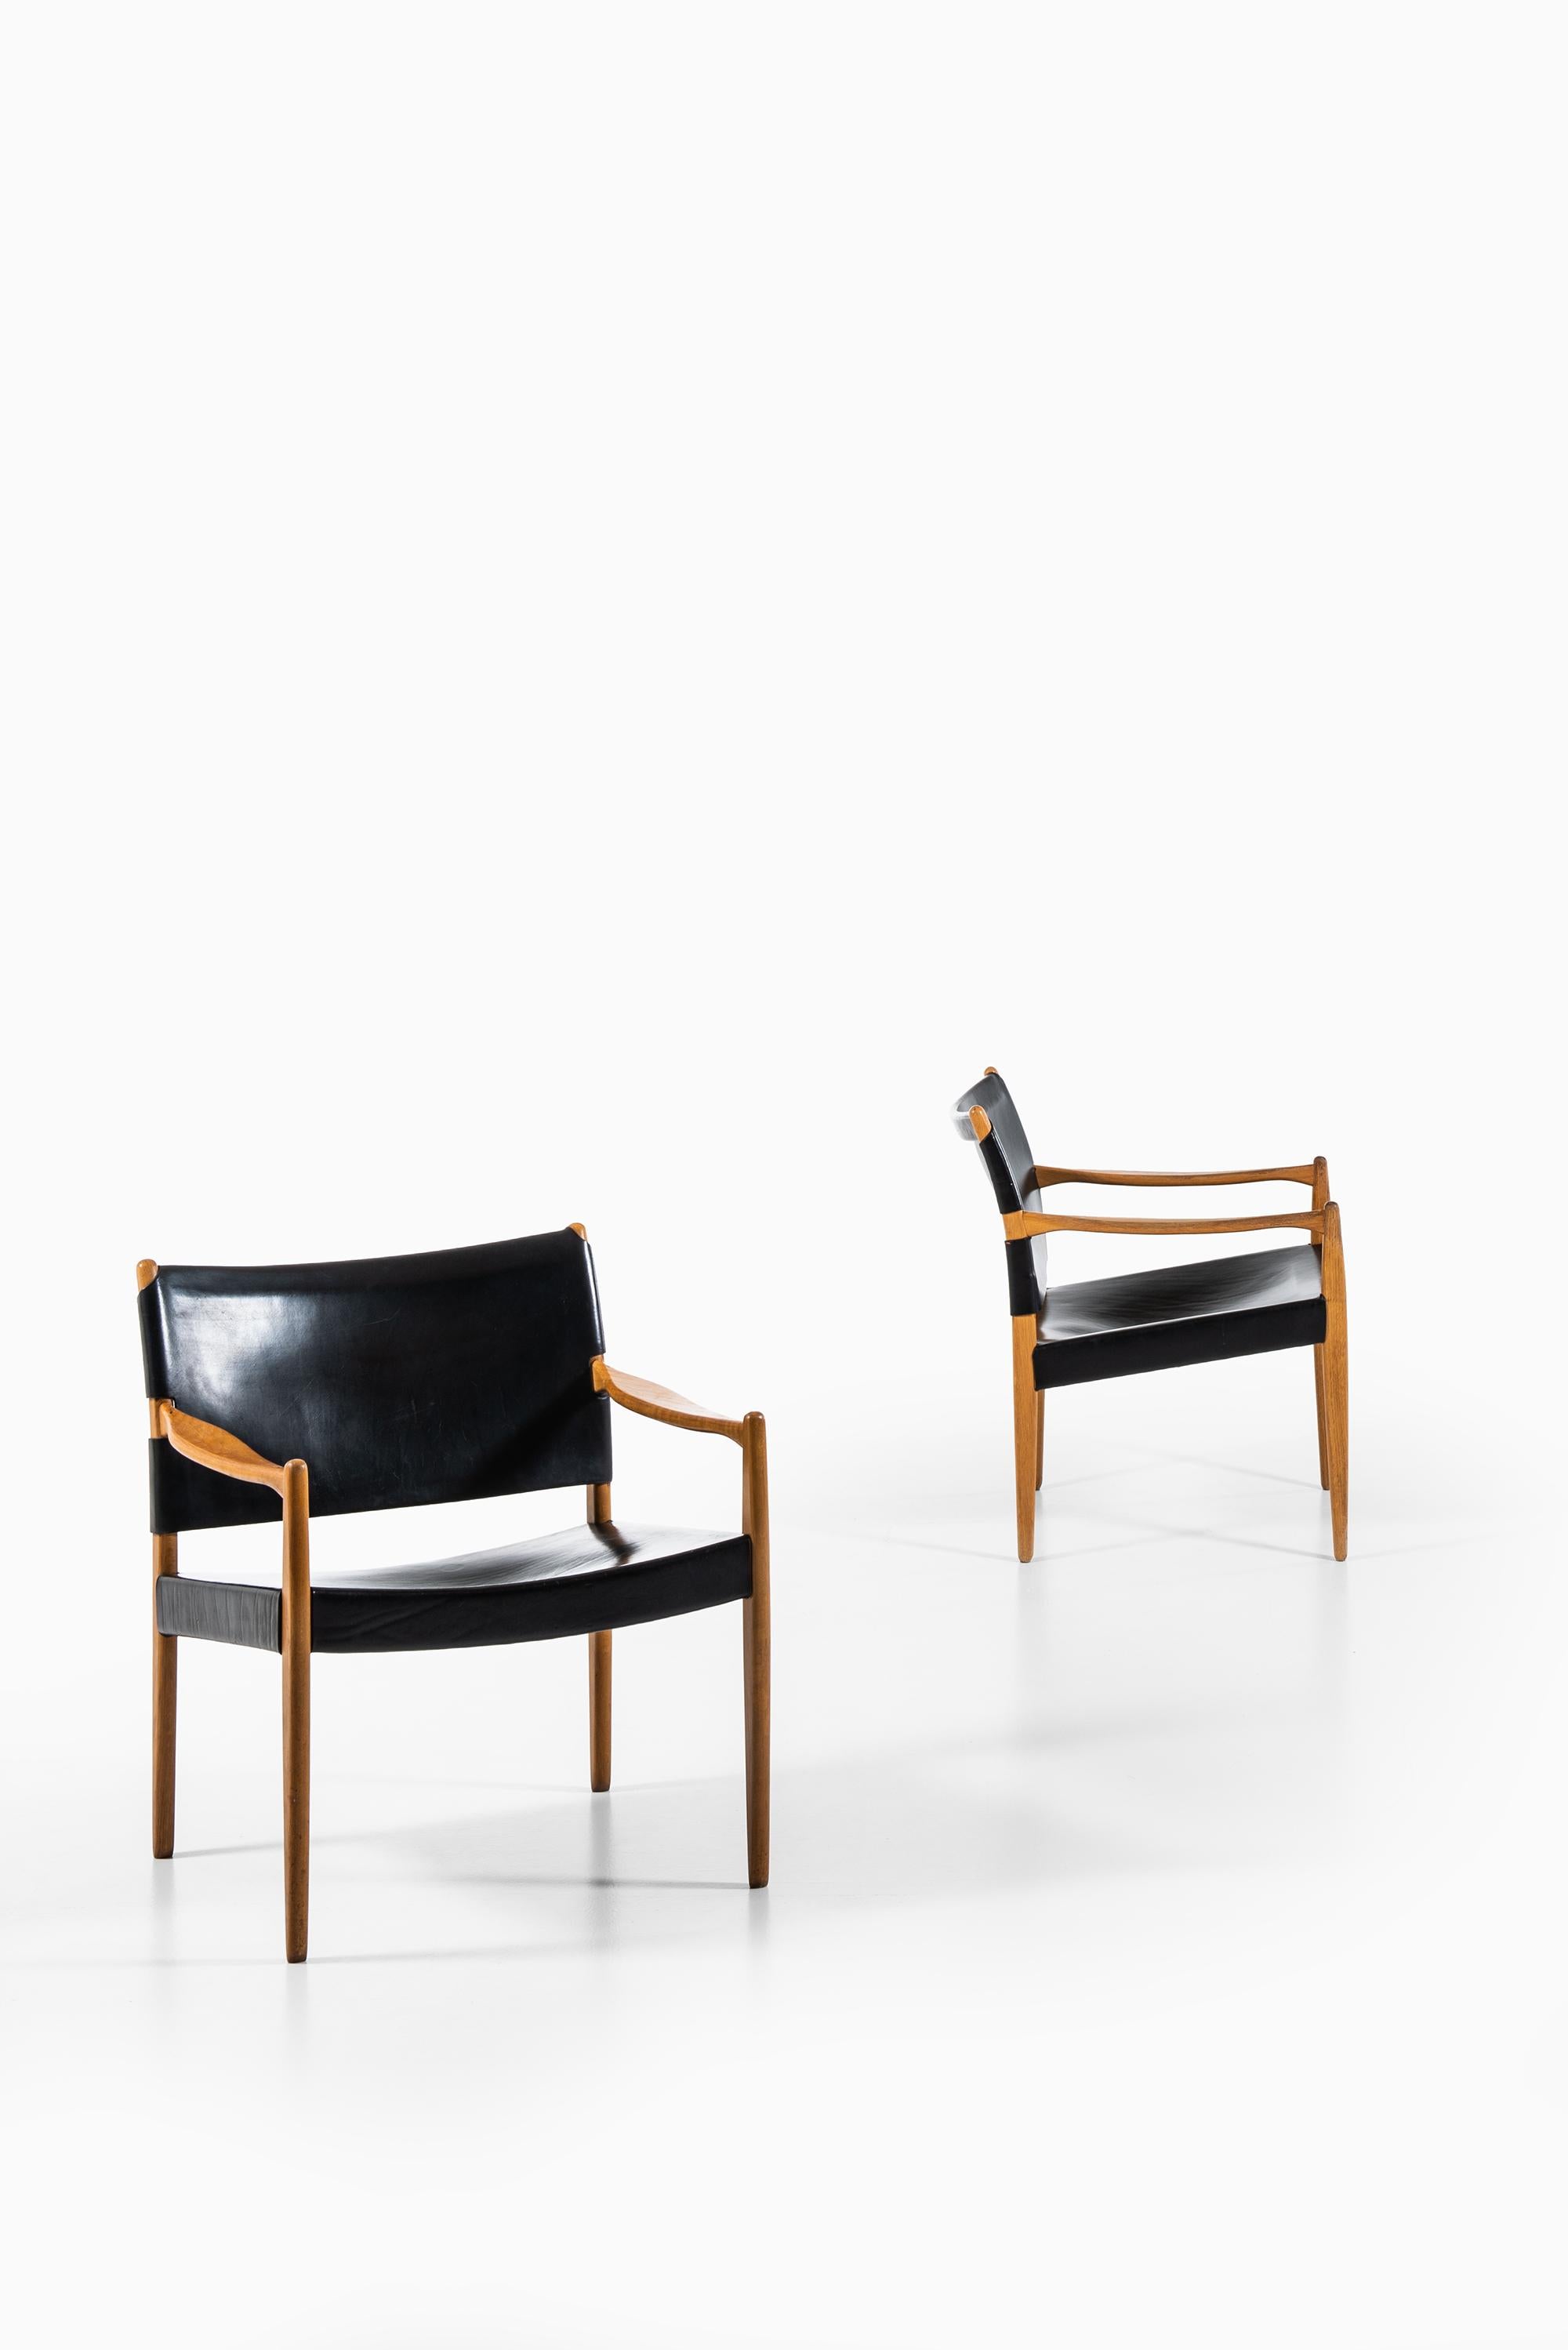 A pair of easy chairs model Premiär designed by Per-Olof Scotte. Produced by Ikea in Sweden.